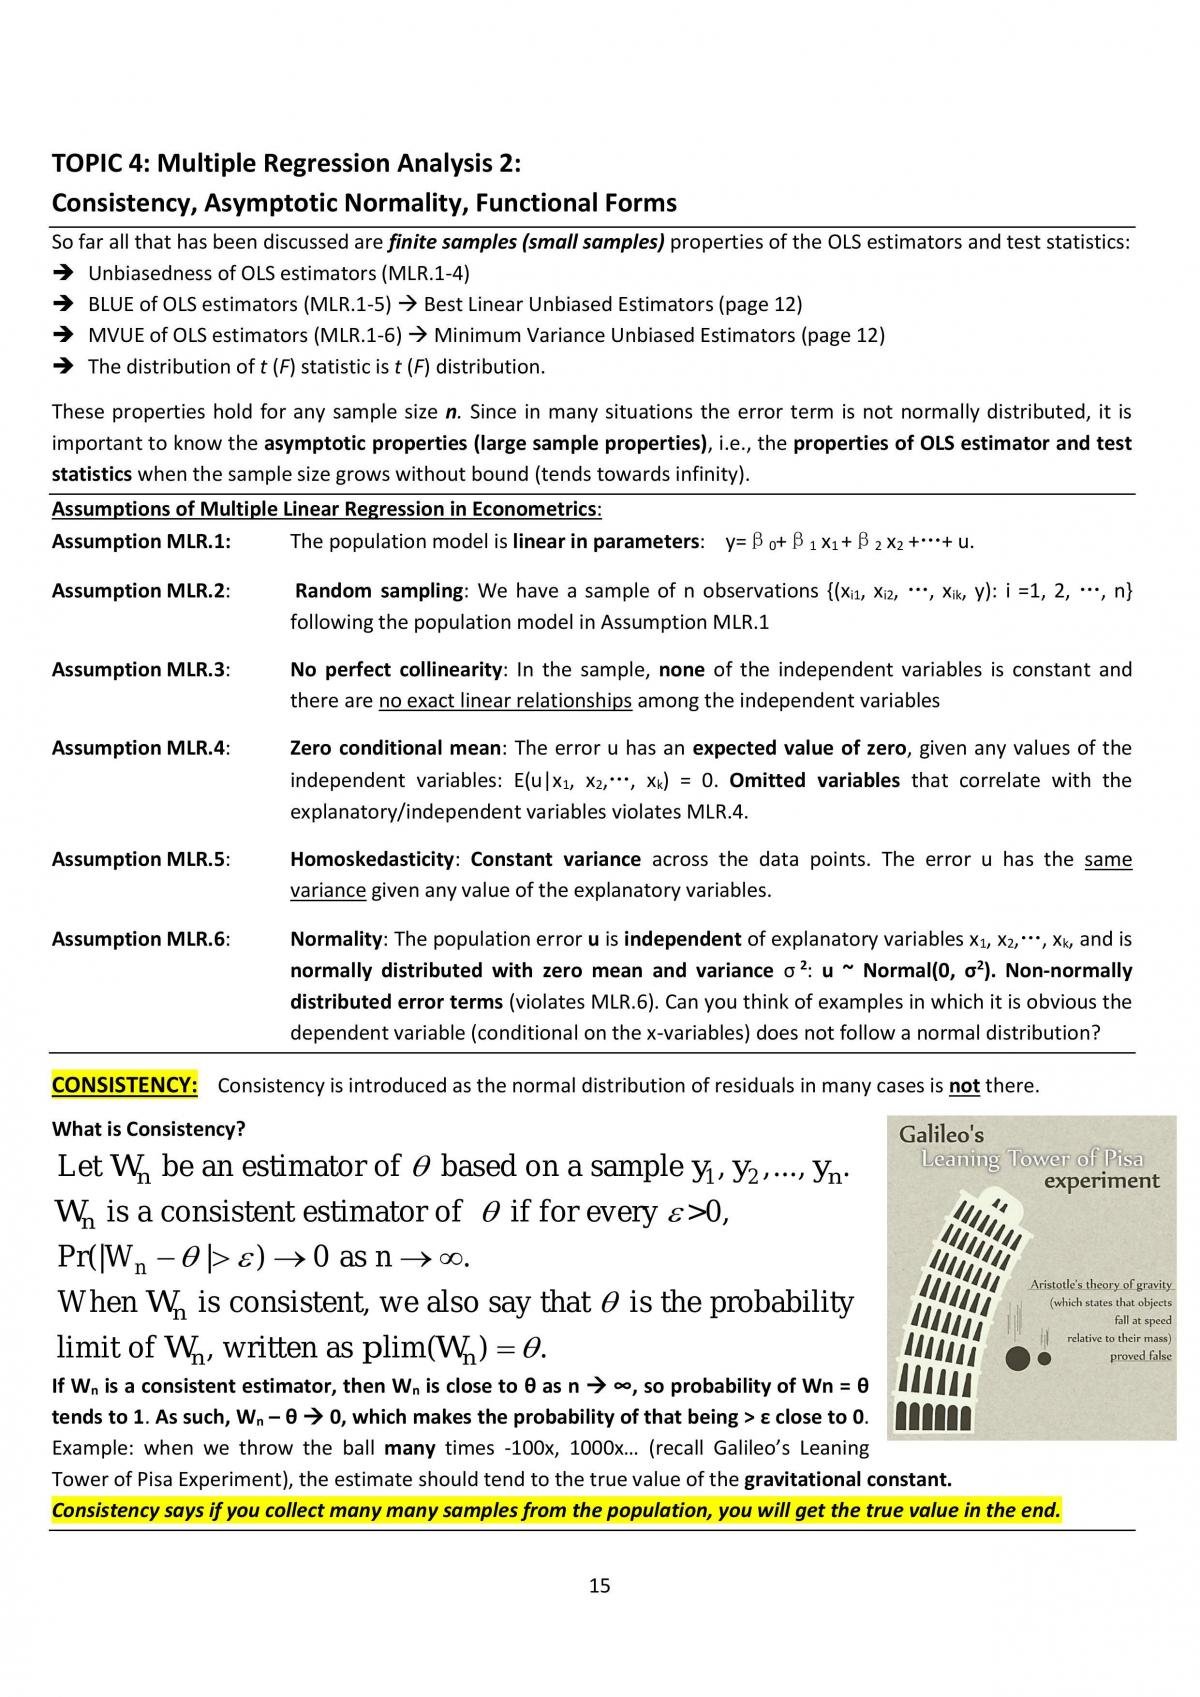 BSE3703 - Econometrics for Business I Notes - Page 15